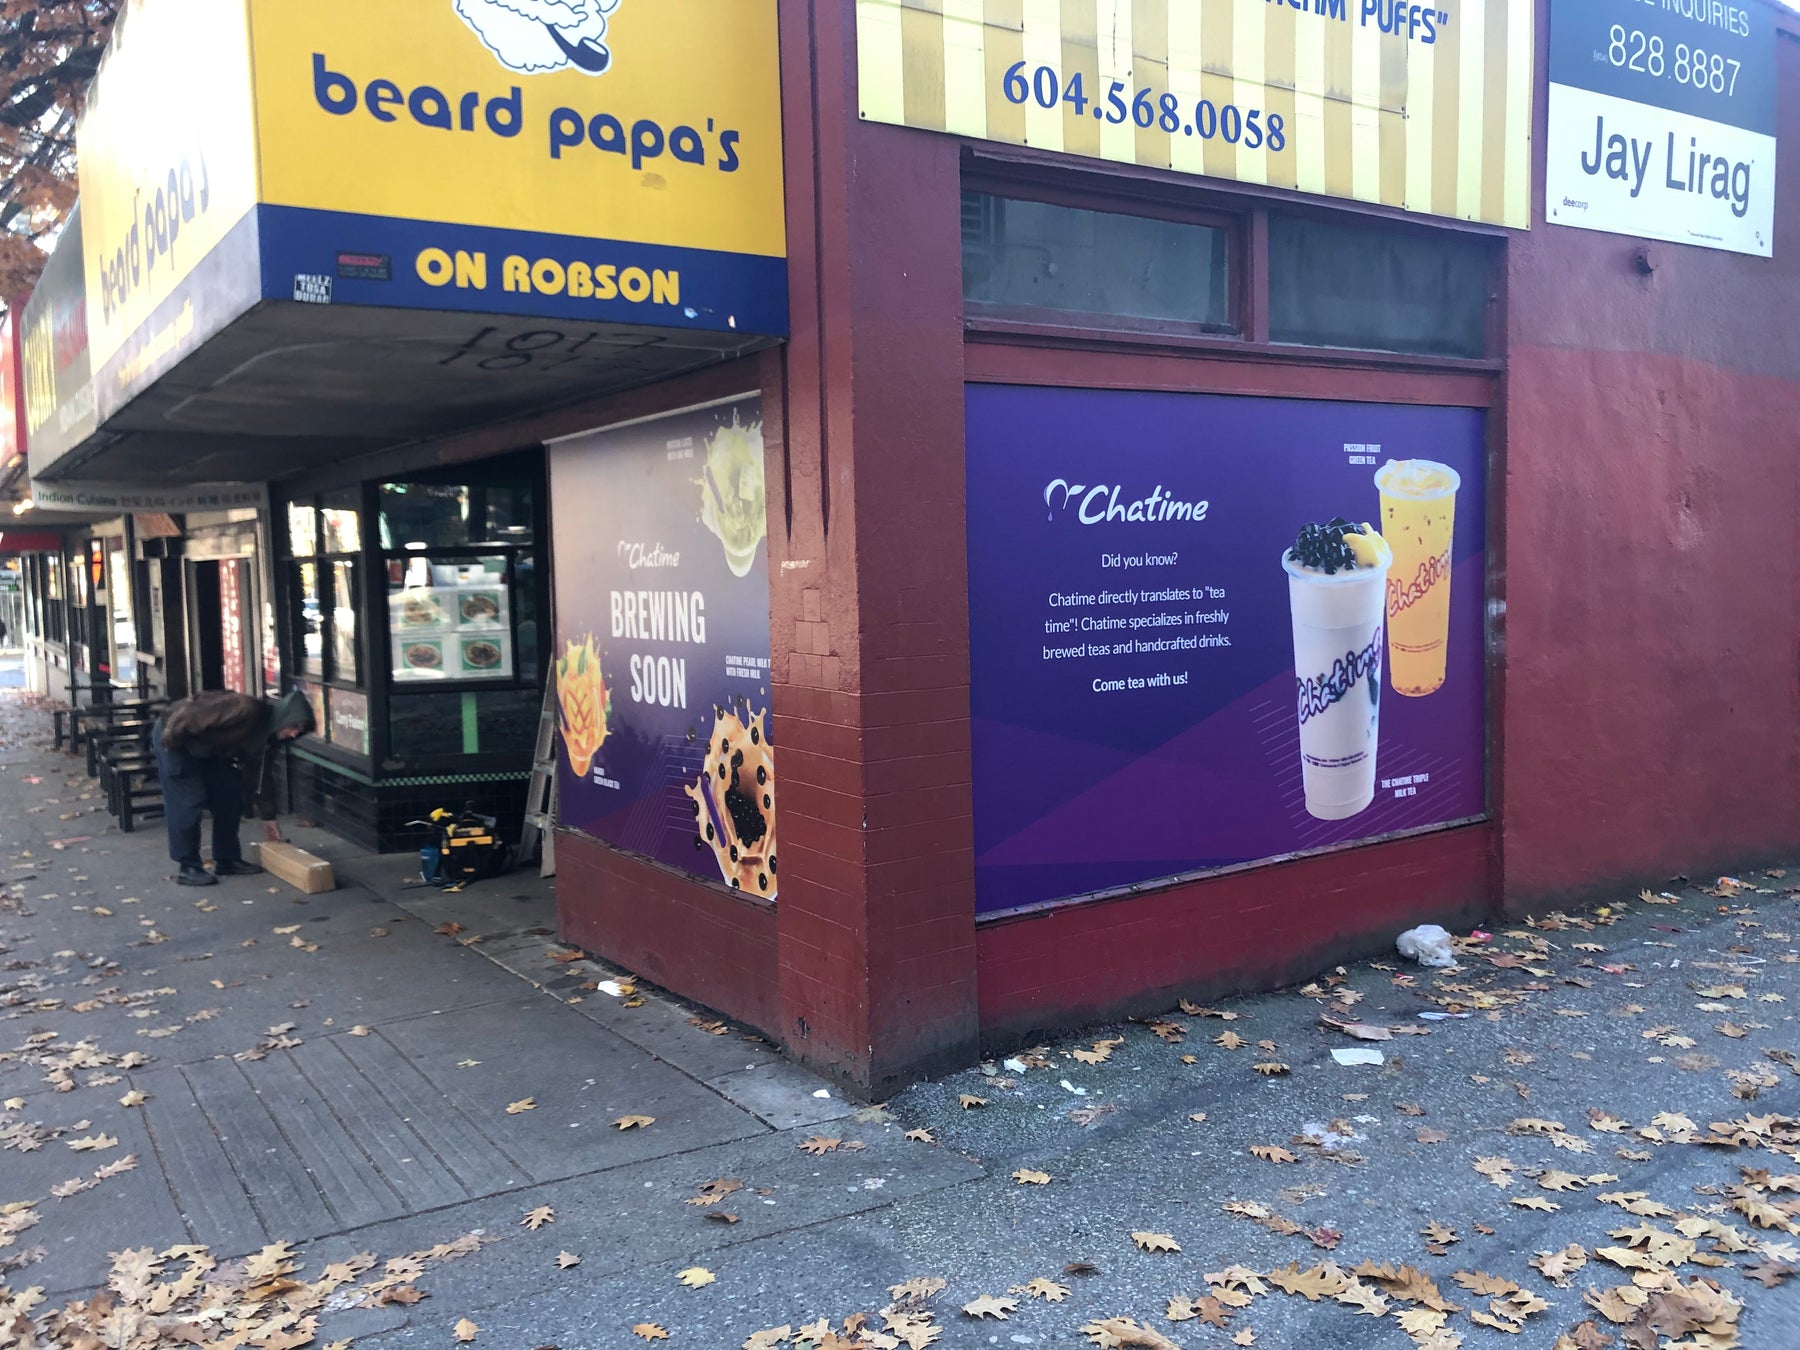 Chatime on Robson Street in Vancouver, BC